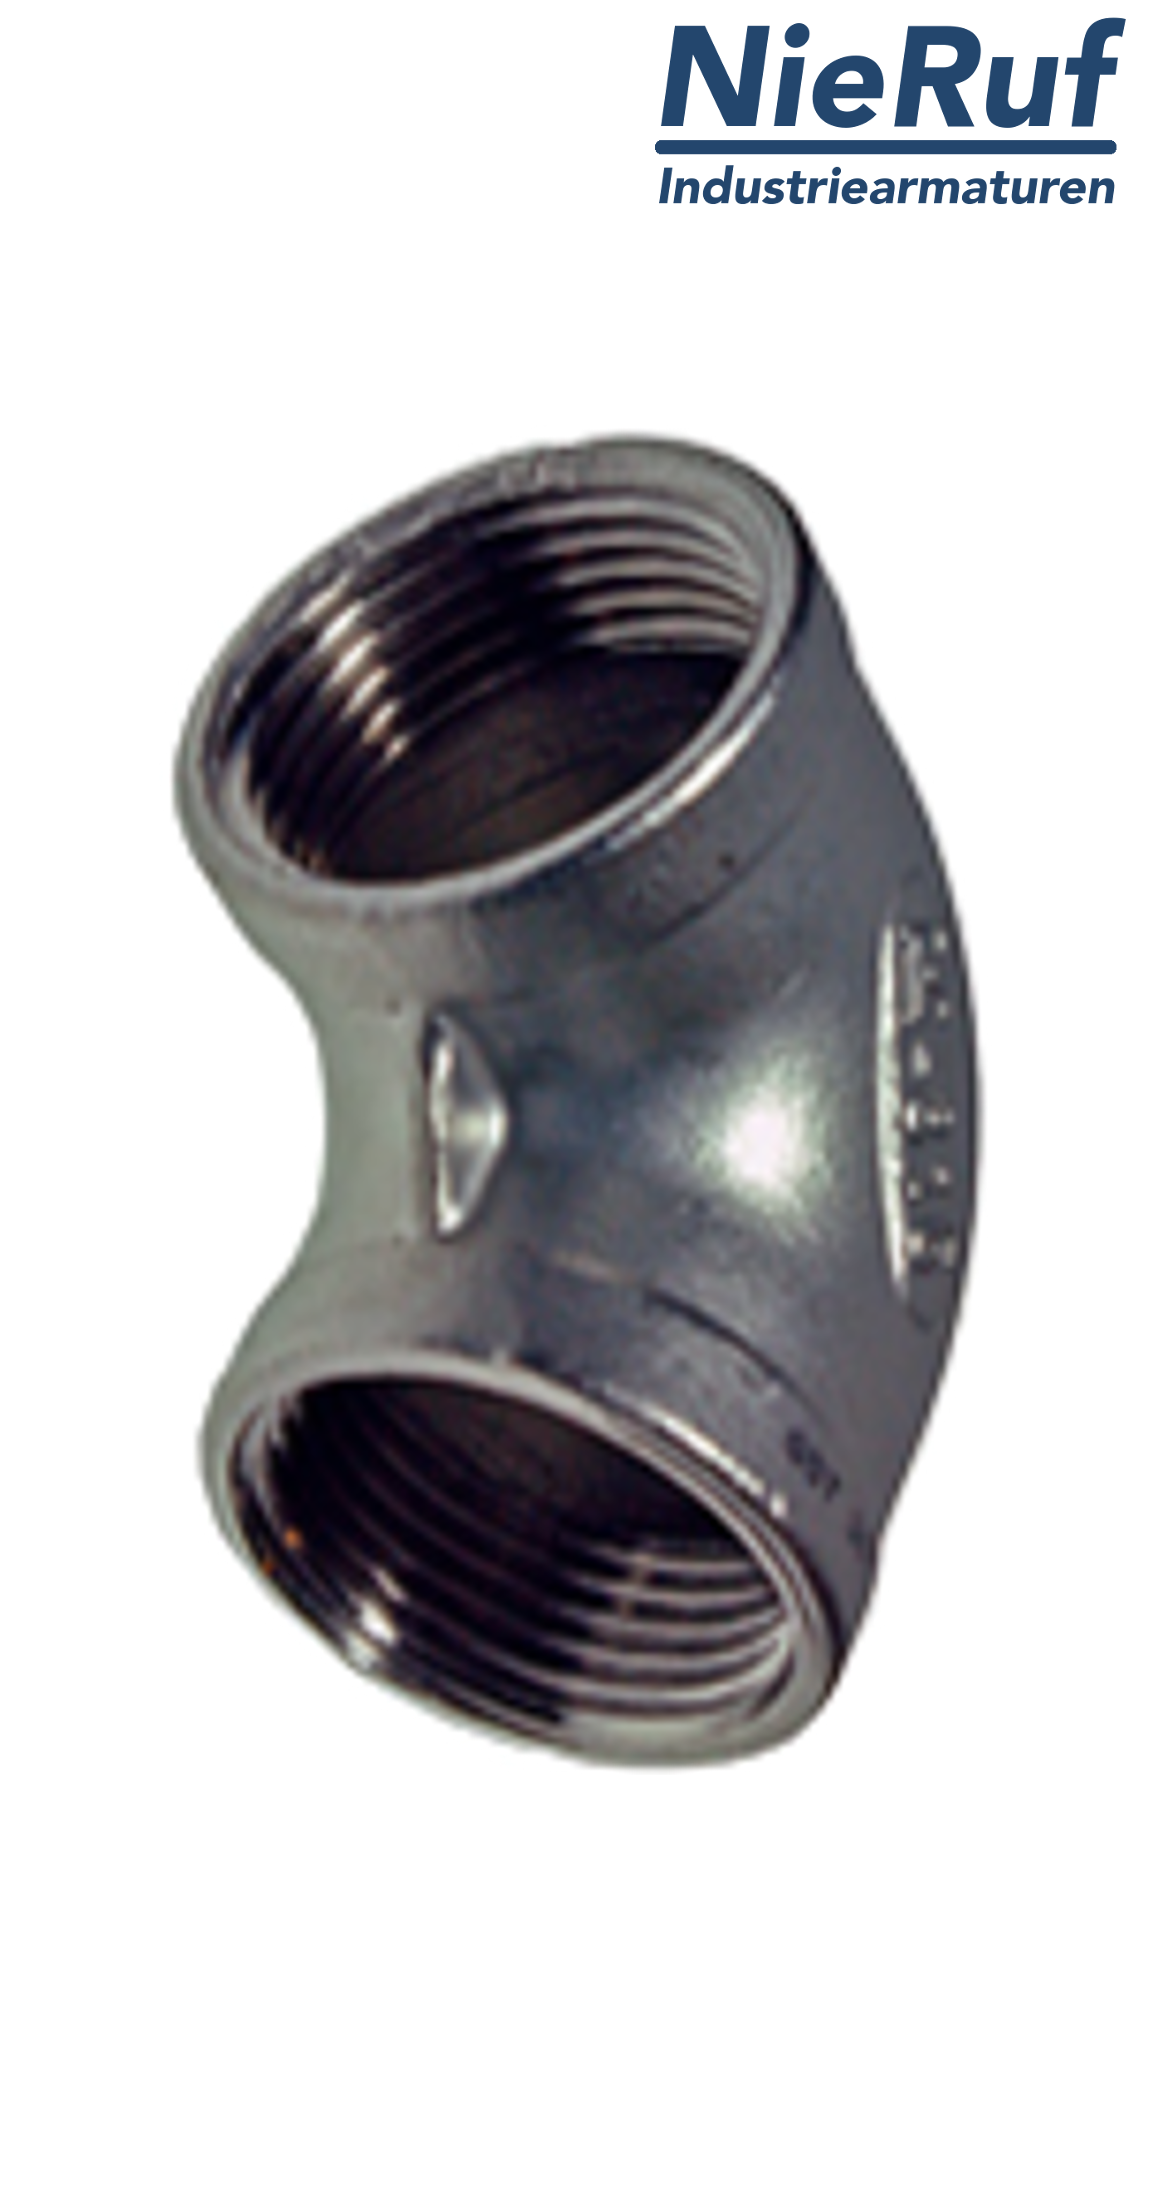 elbow 2" inch NPT stainless steel 316 90° angle